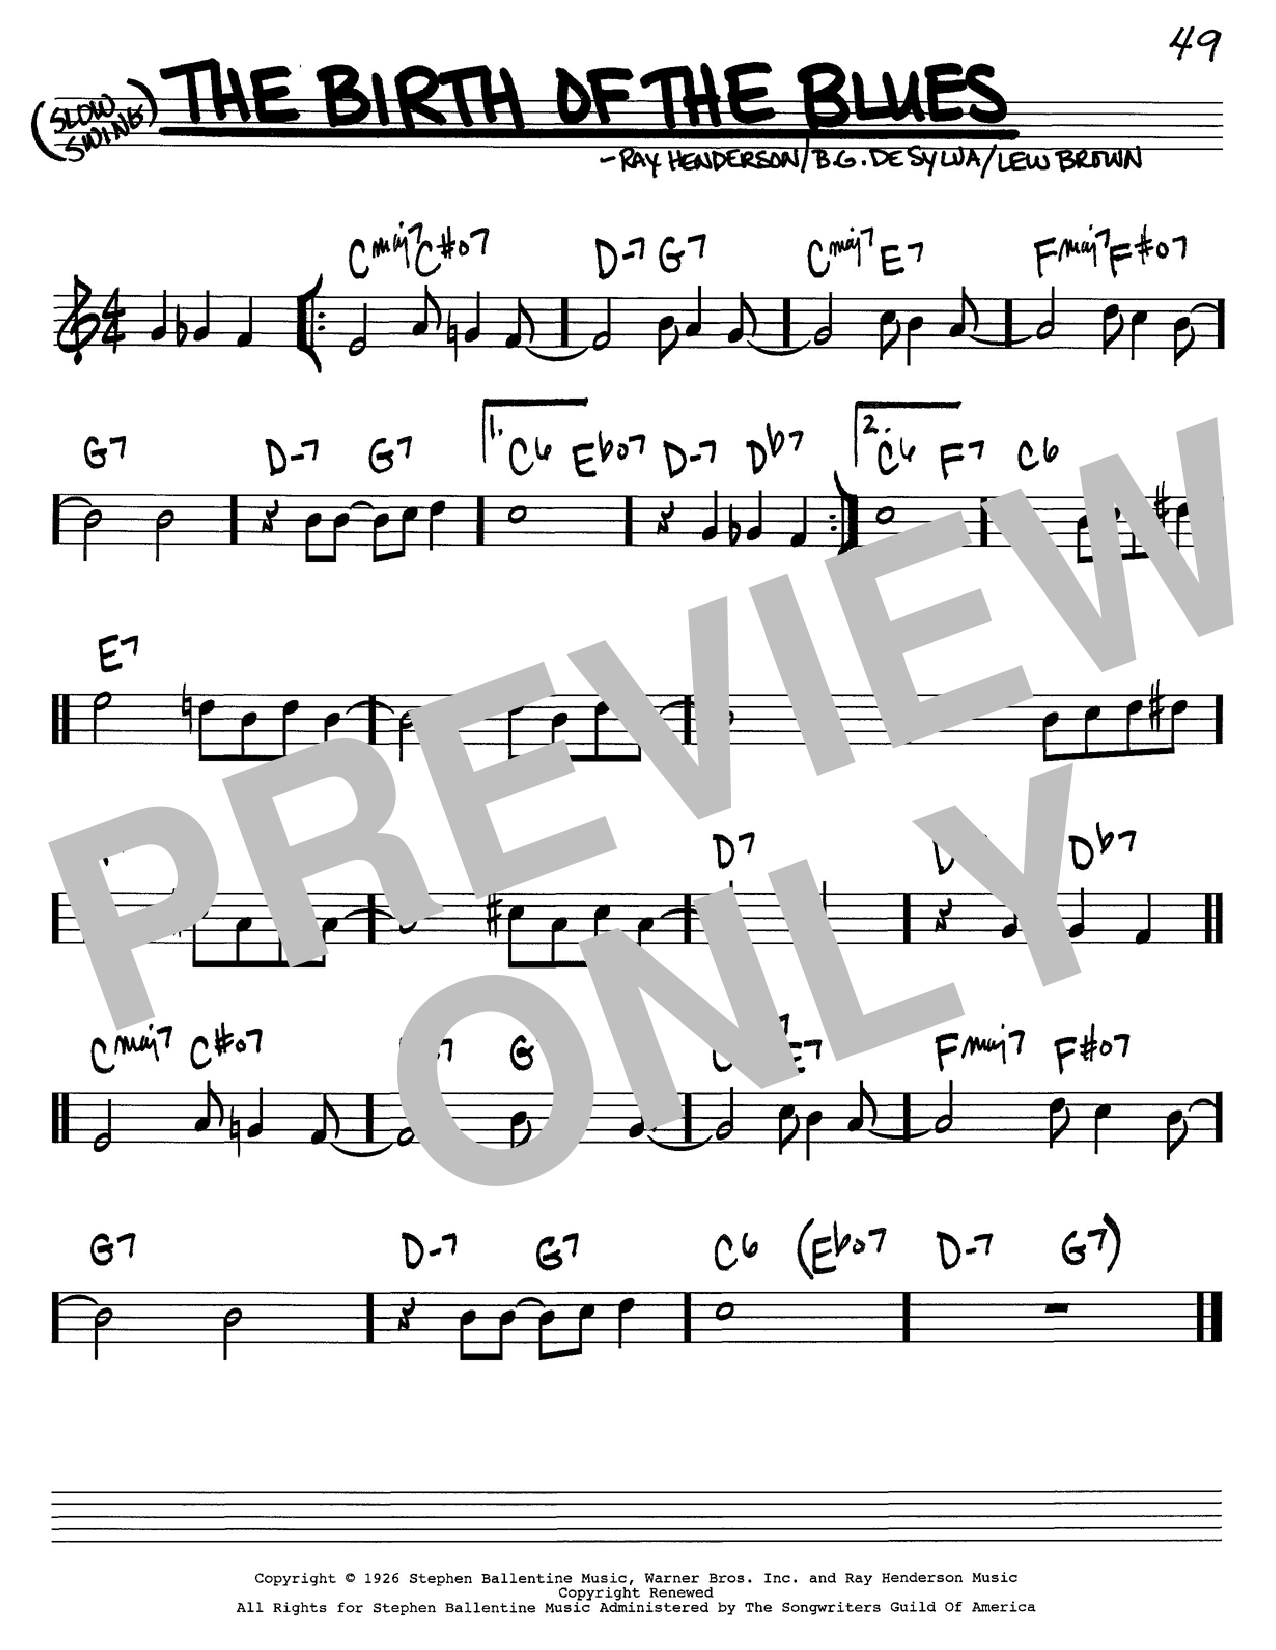 Lew Brown The Birth Of The Blues Sheet Music Notes Download Printable Pdf Score 182122 6211